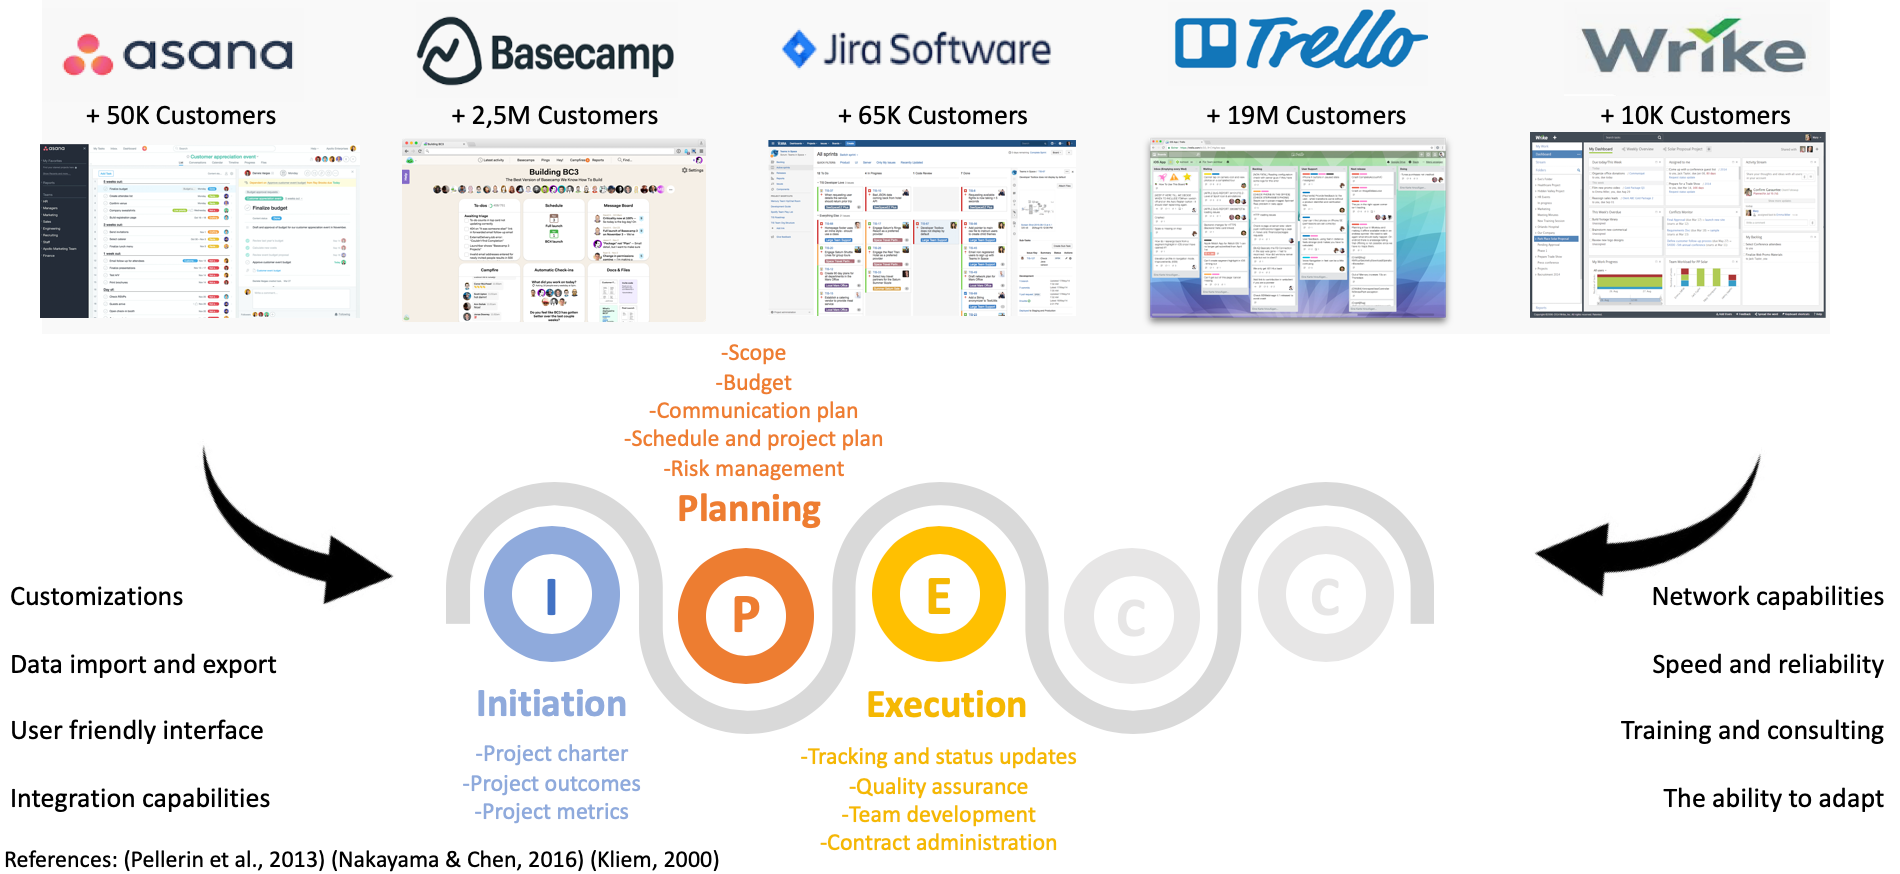 Comparison of Popular Project Management Software Tools